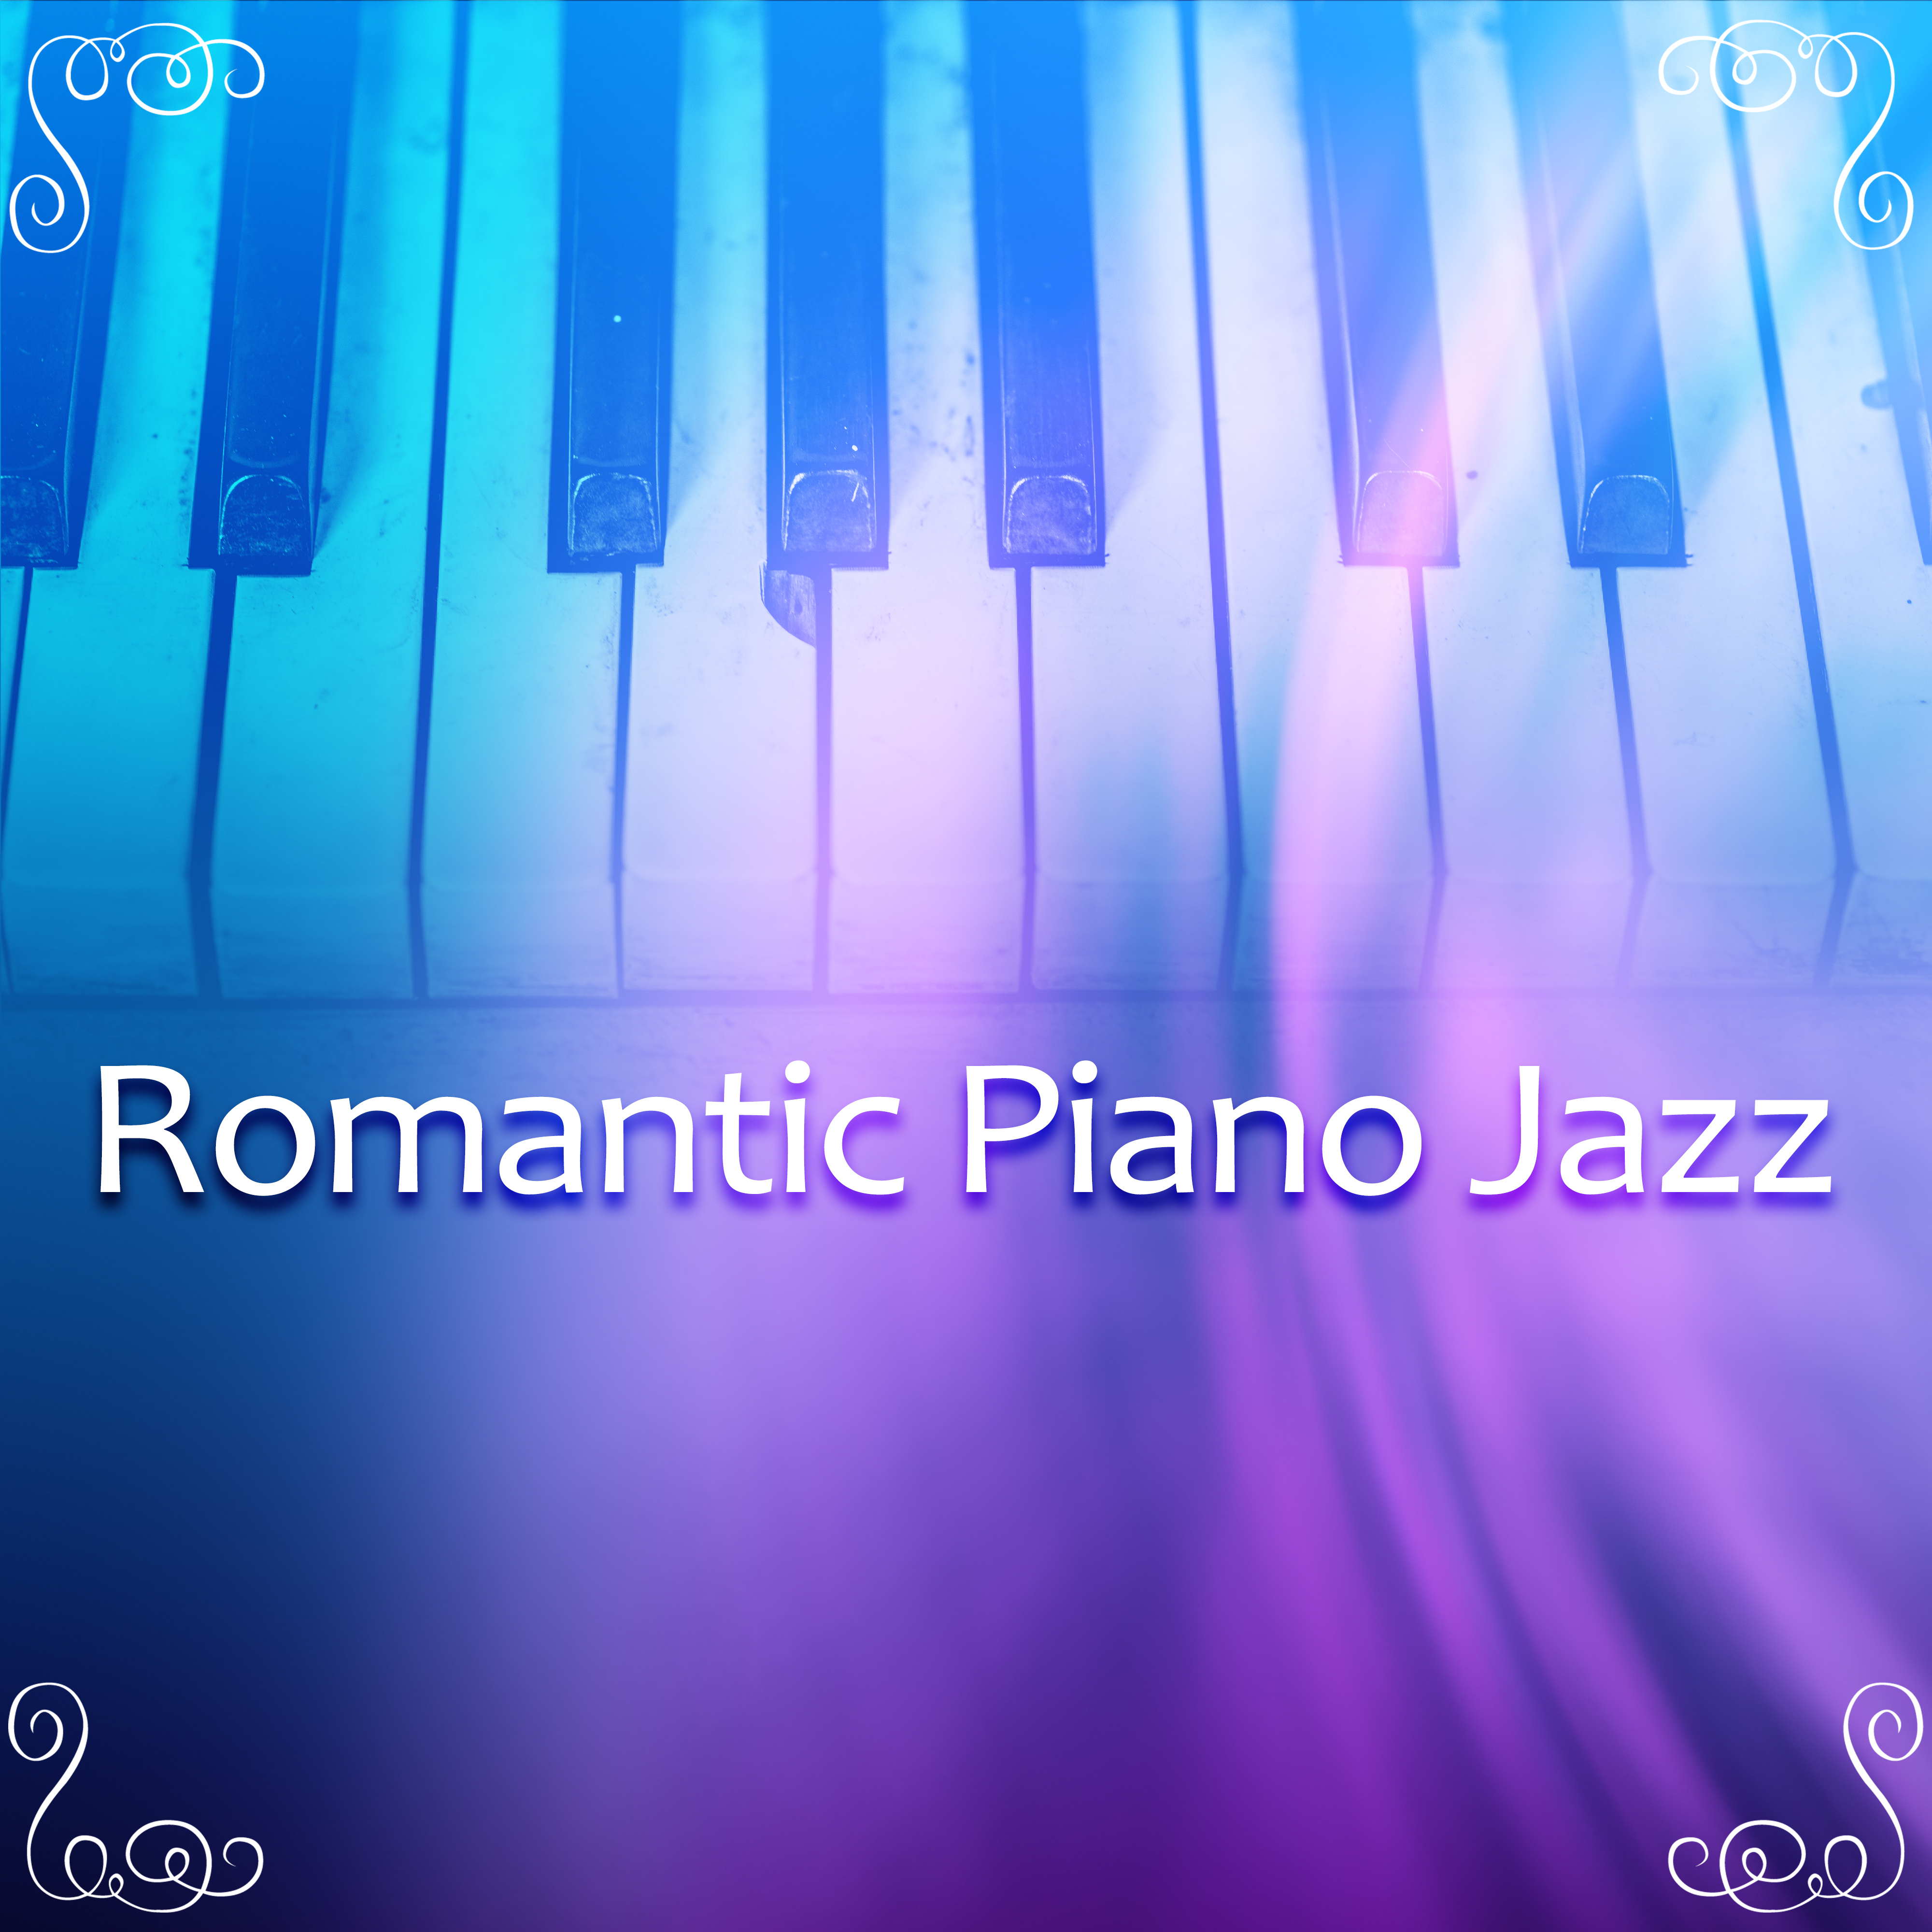 Romantic Piano Jazz – Relaxation Songs, Jazz Love Story, Romantic Walk, Magic Time, Music for Lovers